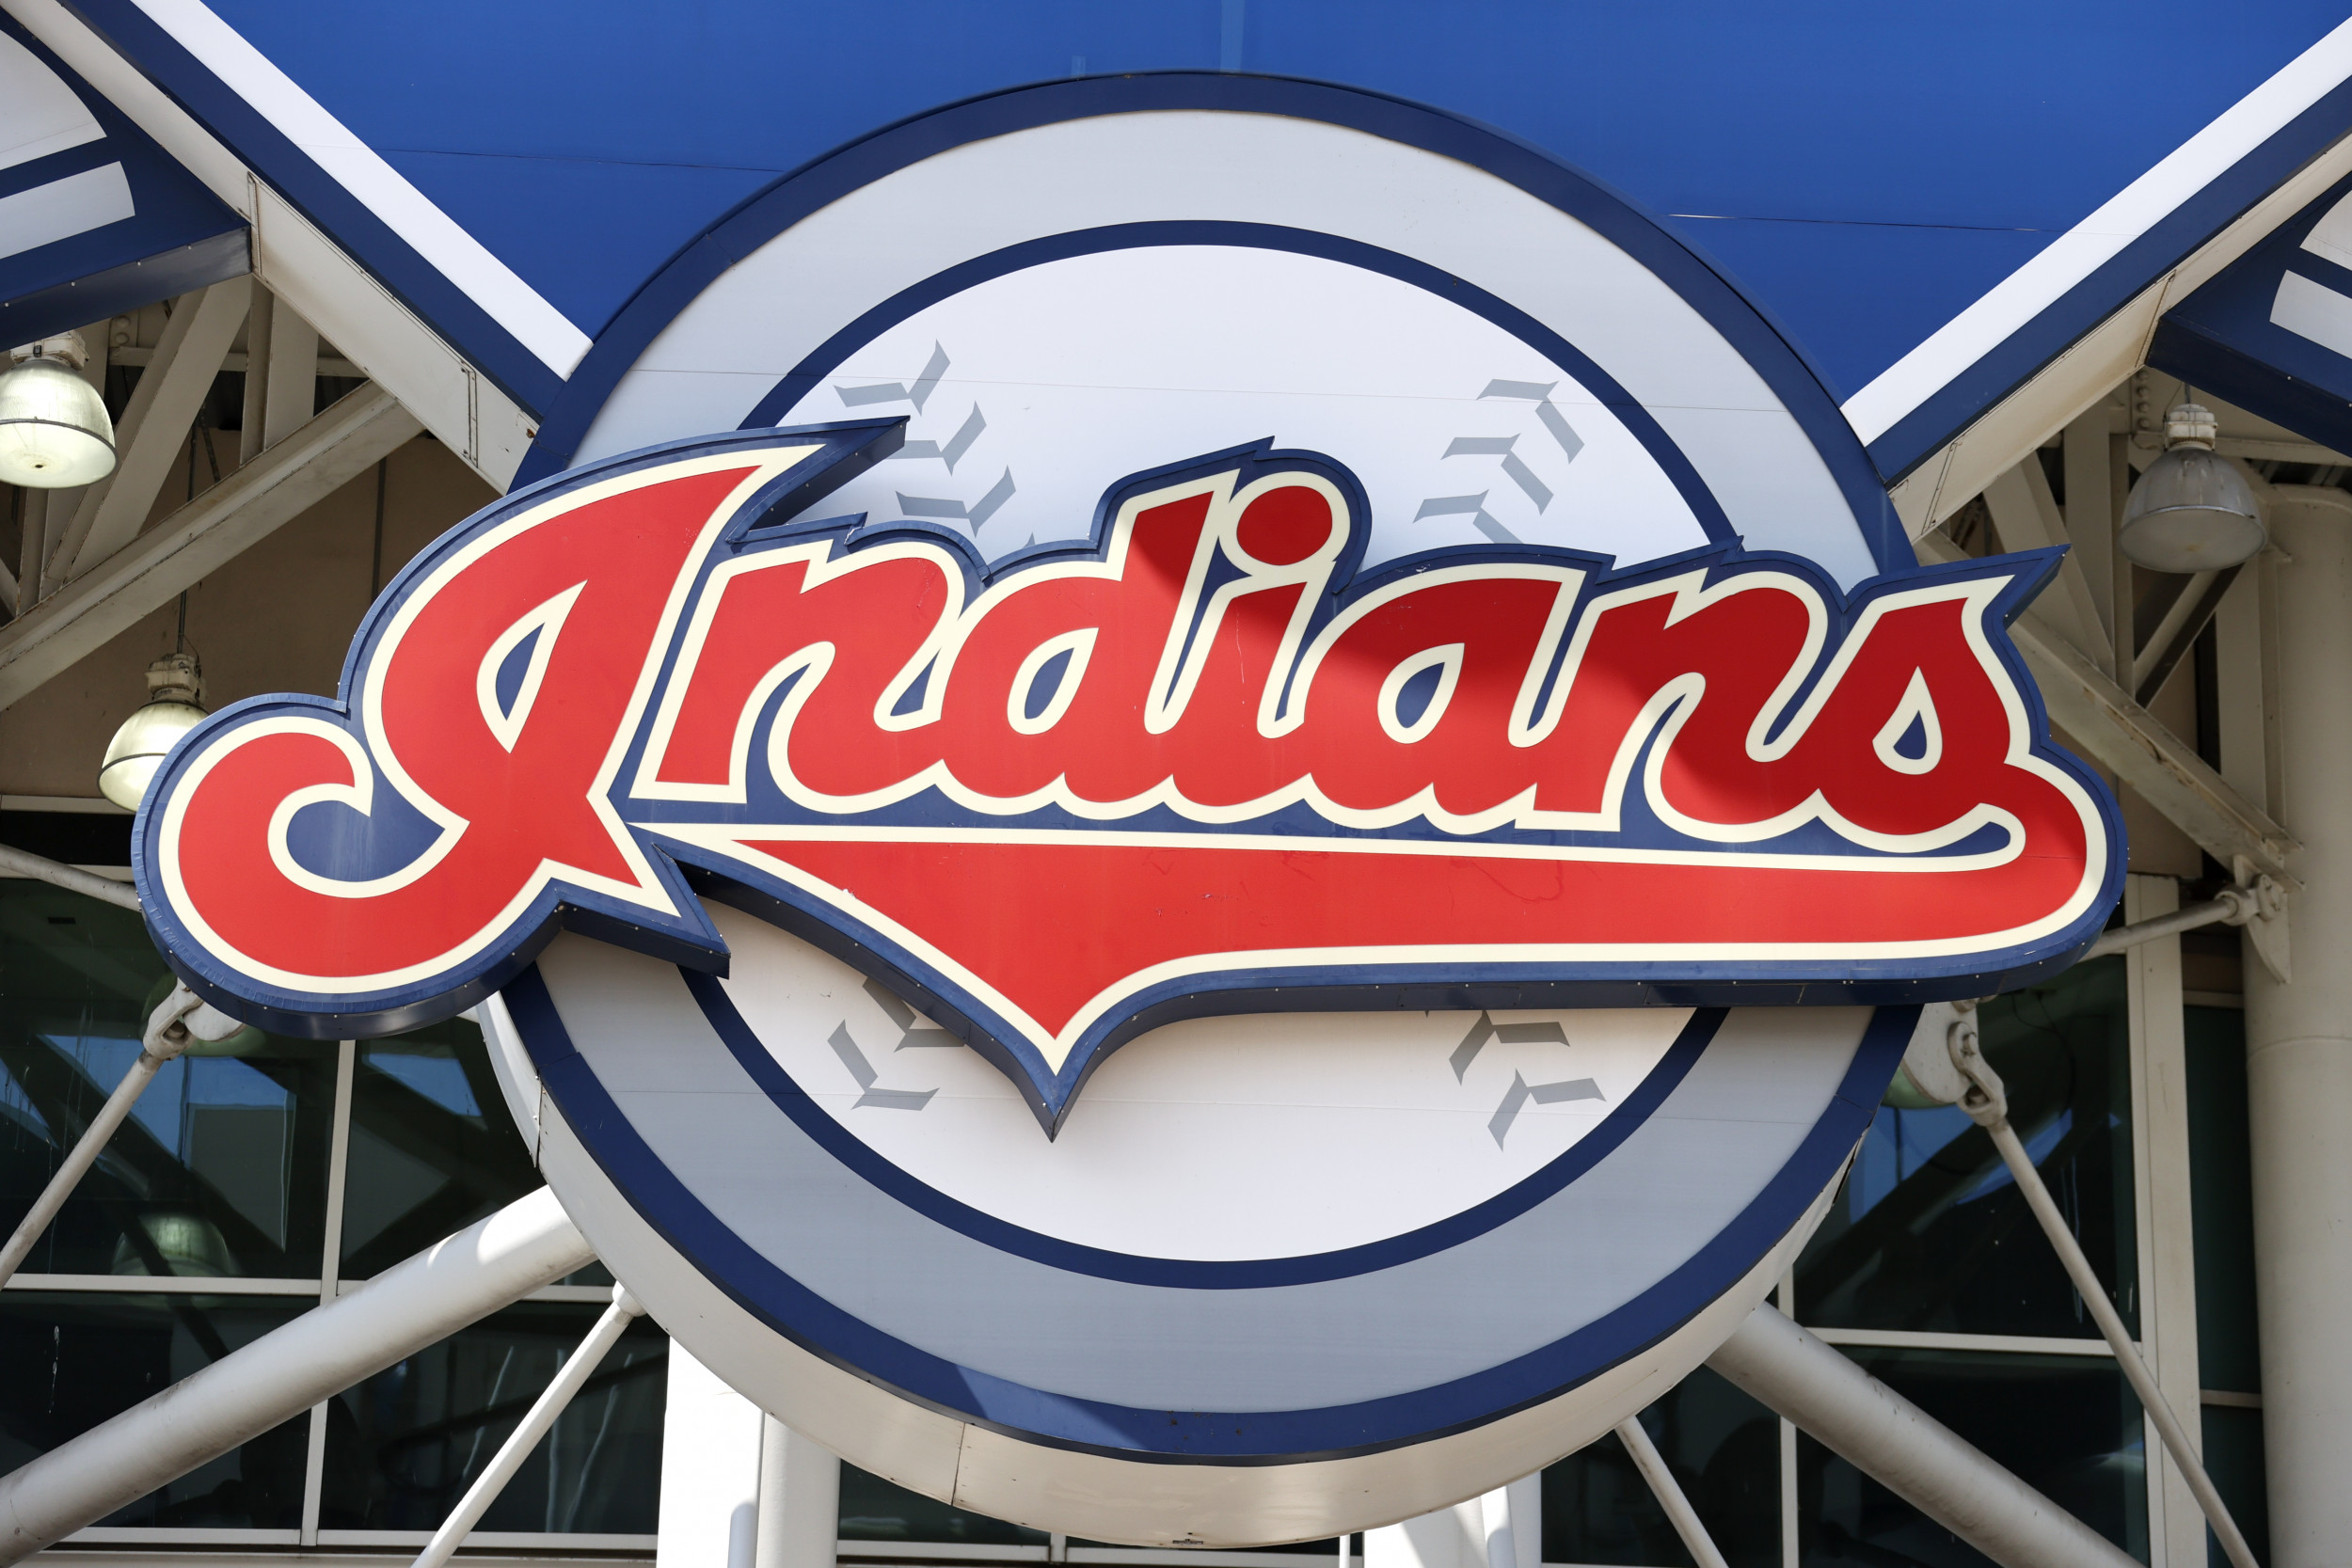 Fans react to news that Cleveland Indians will no longer wear Chief Wahoo  logo in 2019